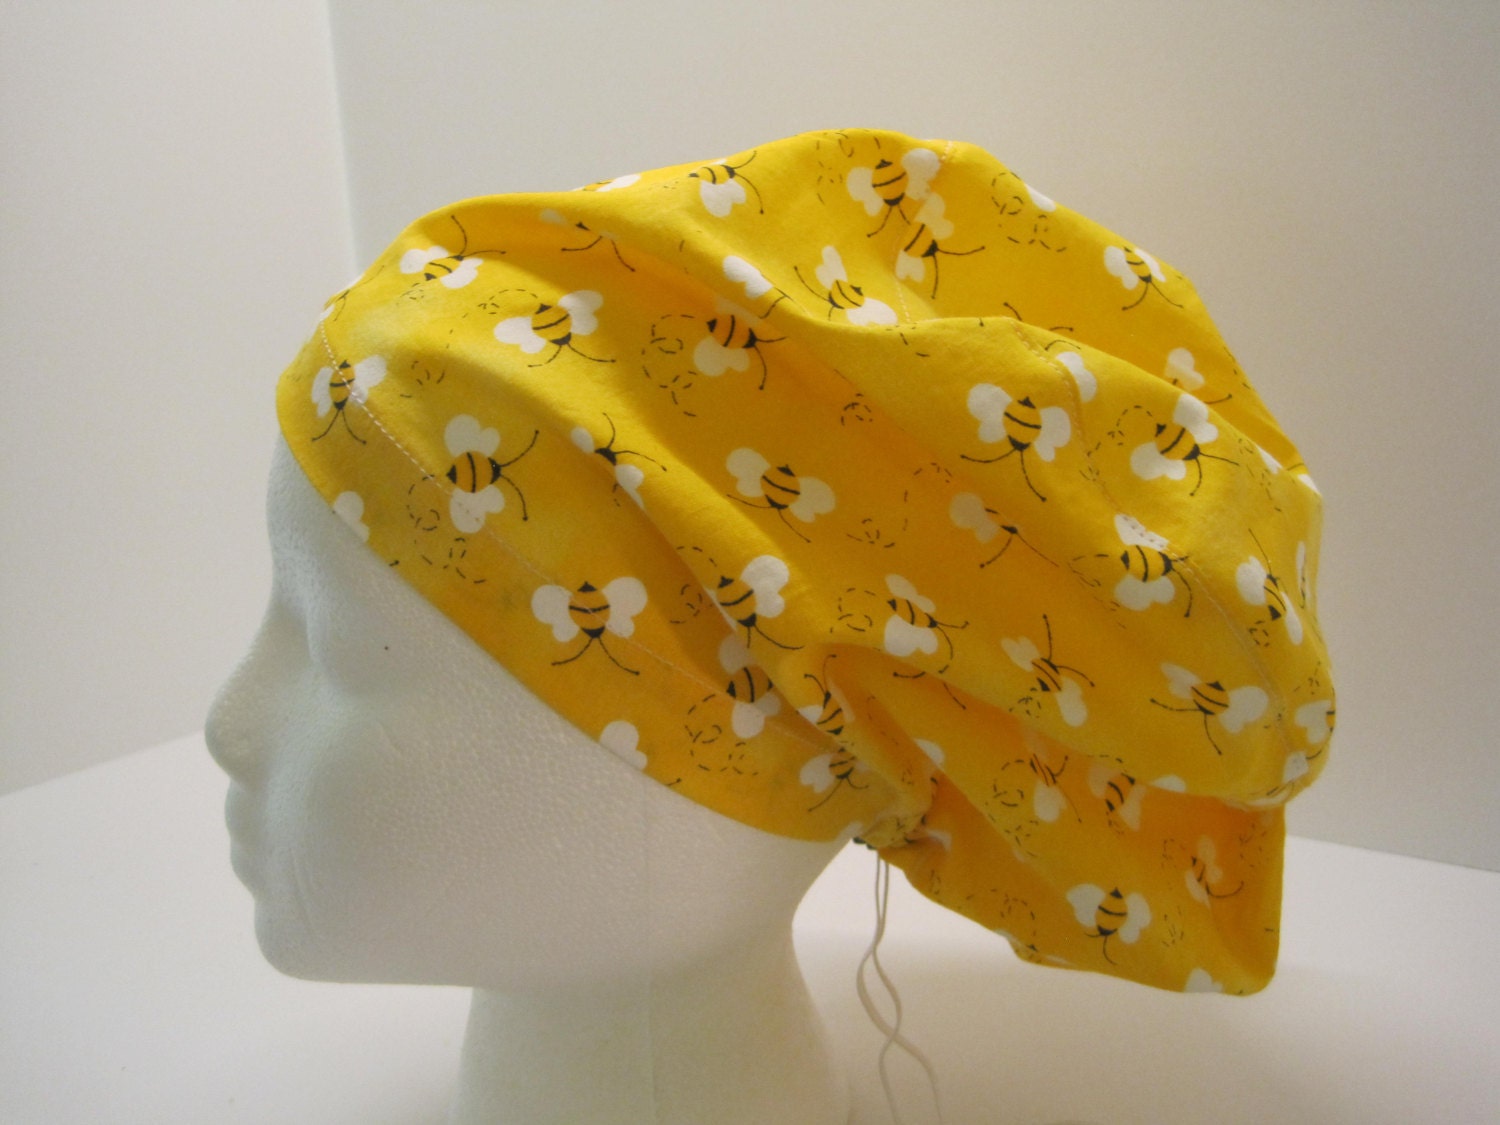 Euro style nurse scrub hat Busy Bee fabric by sewingzen on Etsy